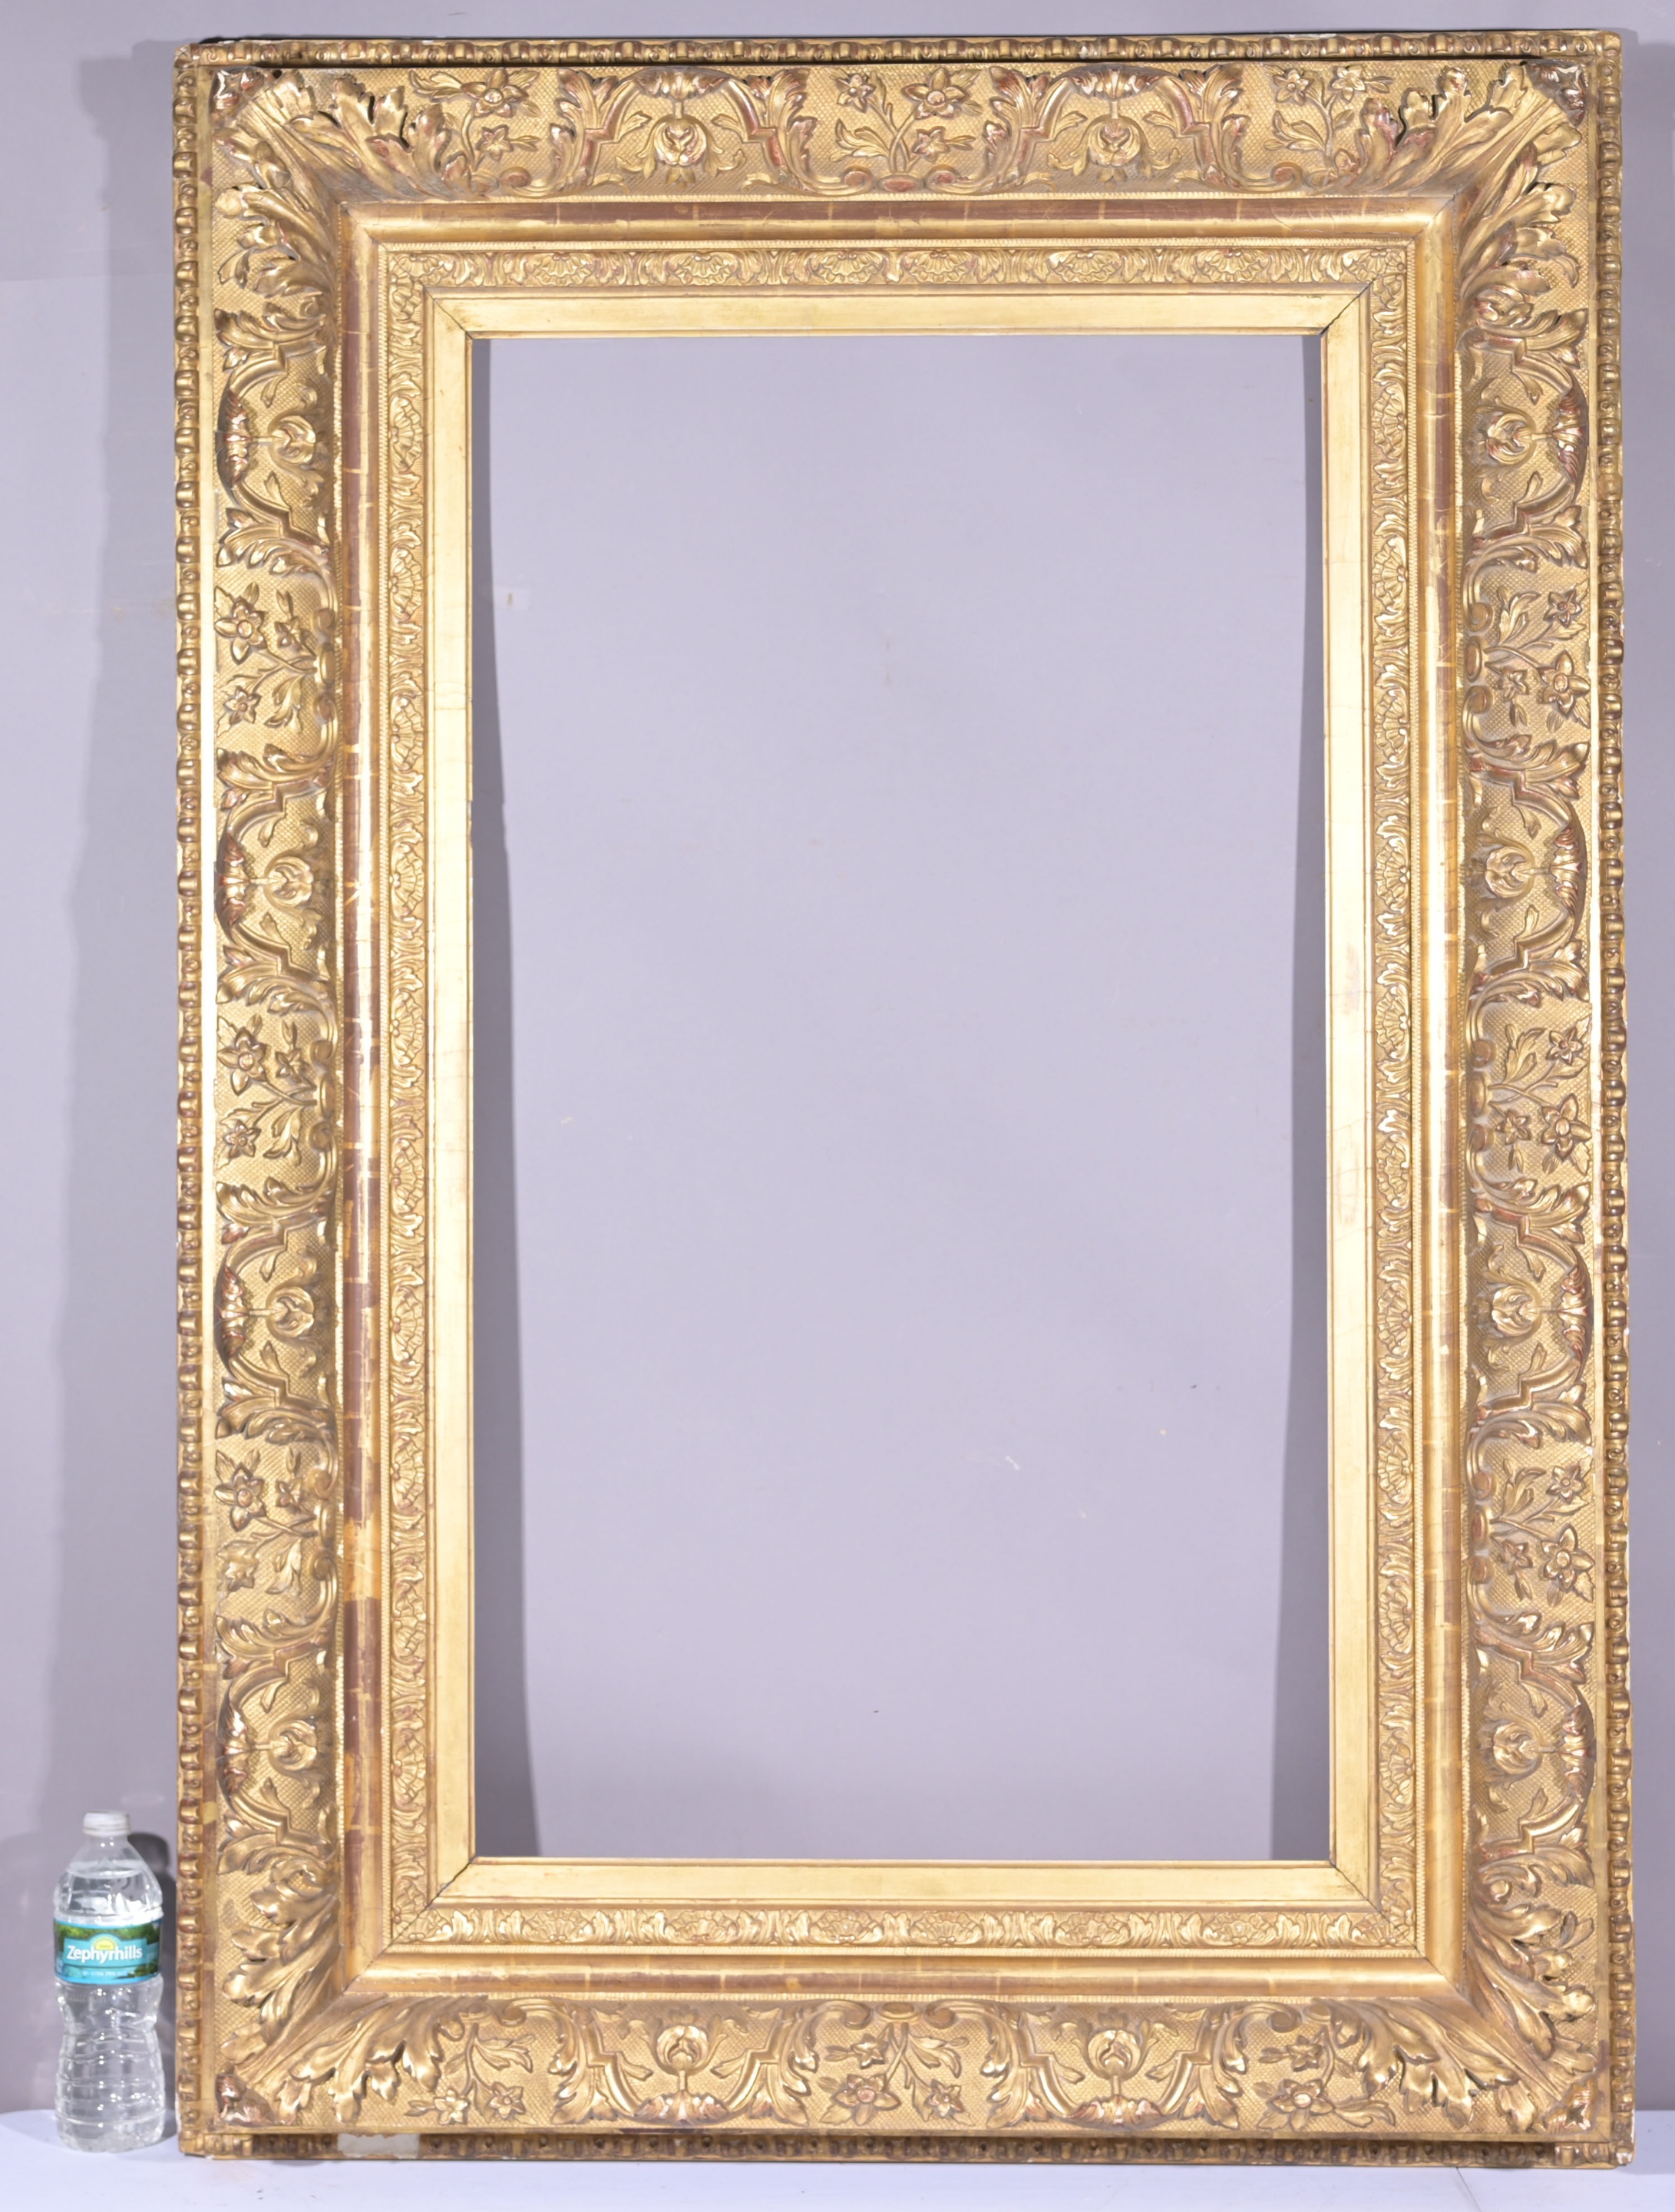 French 19th C Gilt Wood Frame - 37 x 21.75 - Image 2 of 9